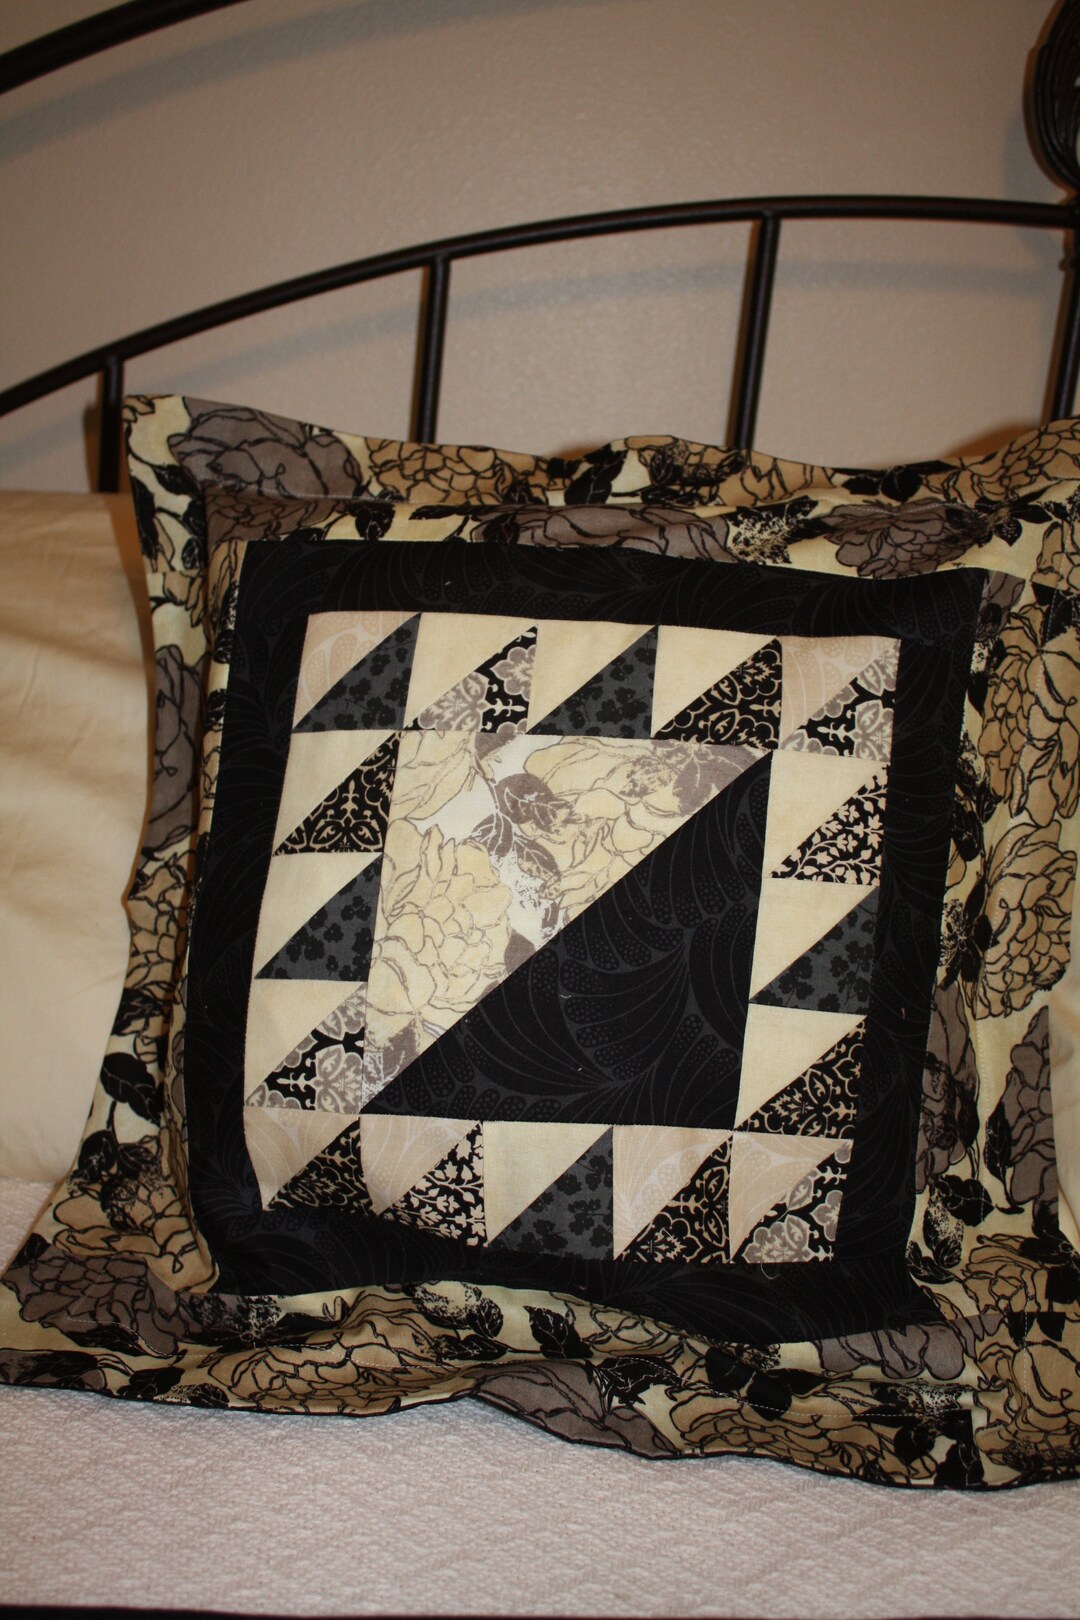 Ninepatch Star Quilted Pillow 12x12